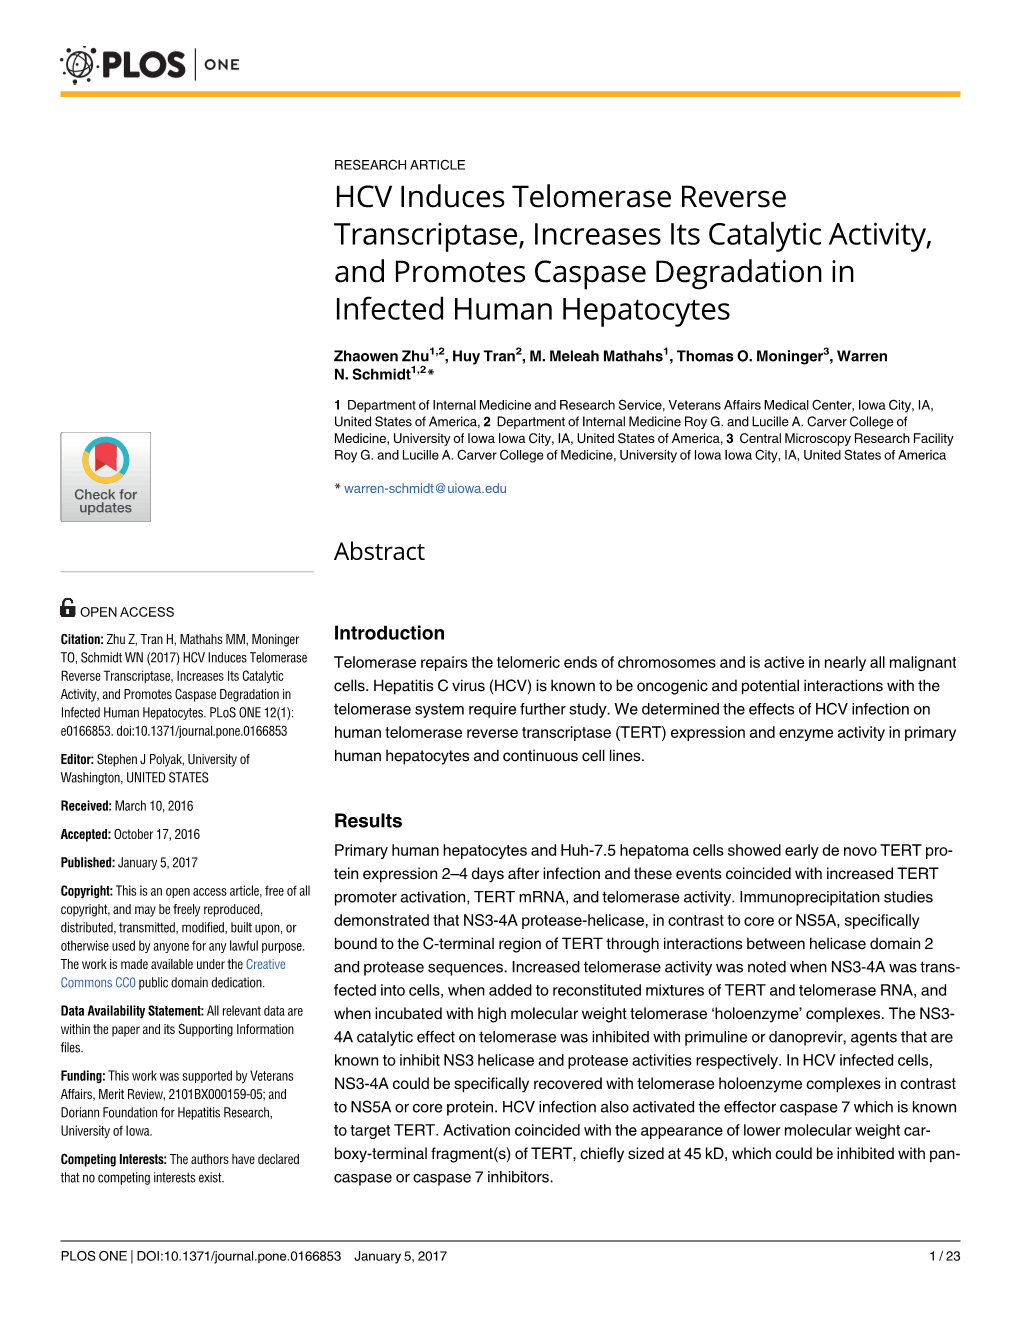 HCV Induces Telomerase Reverse Transcriptase, Increases Its Catalytic Activity, and Promotes Caspase Degradation in Infected Human Hepatocytes